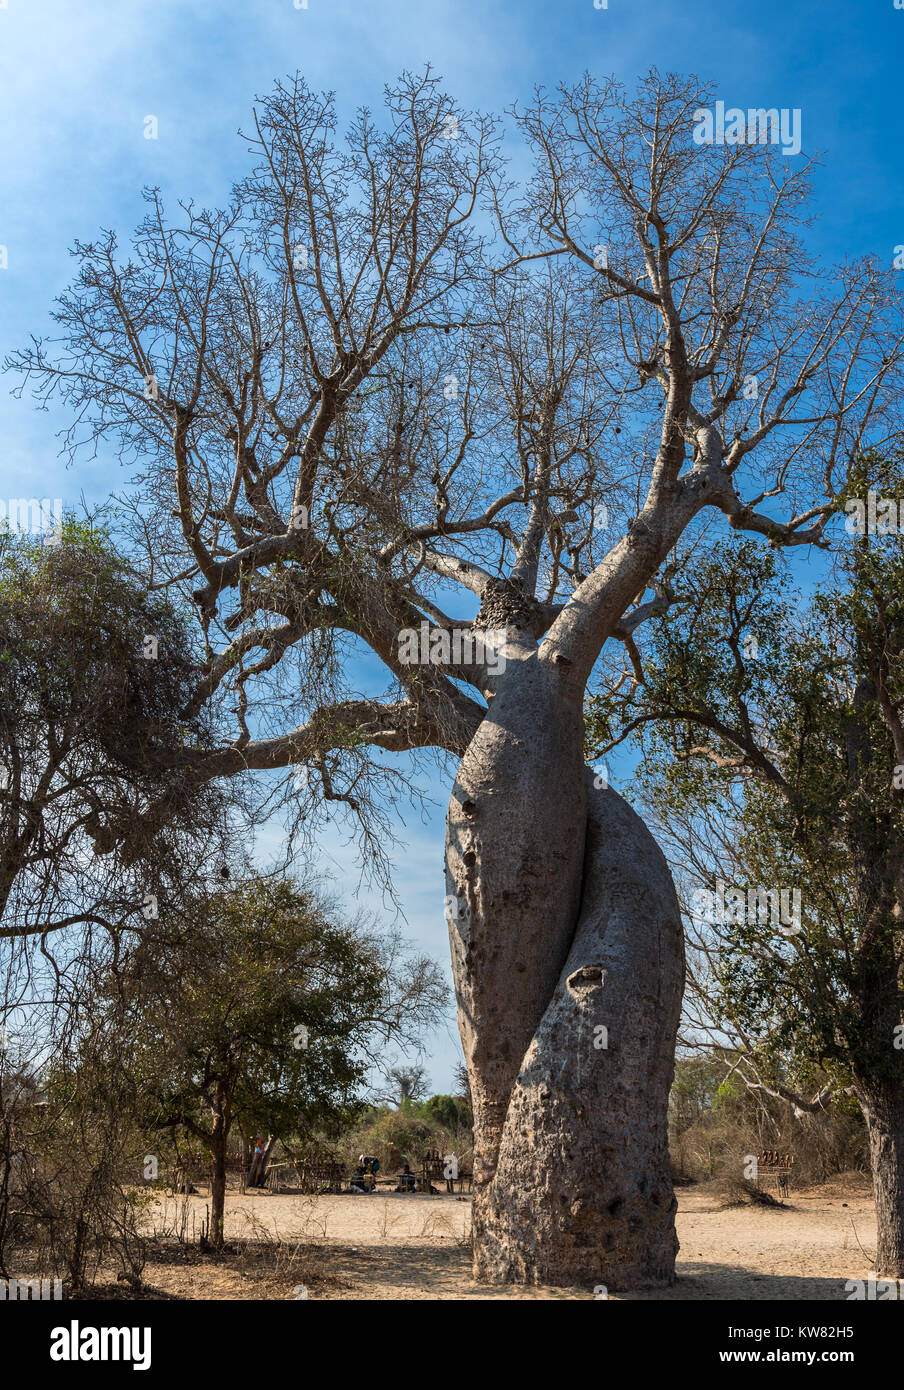 Two intertwined baobab trees are symbolic for love and confection. Madagascar, Africa. Stock Photo